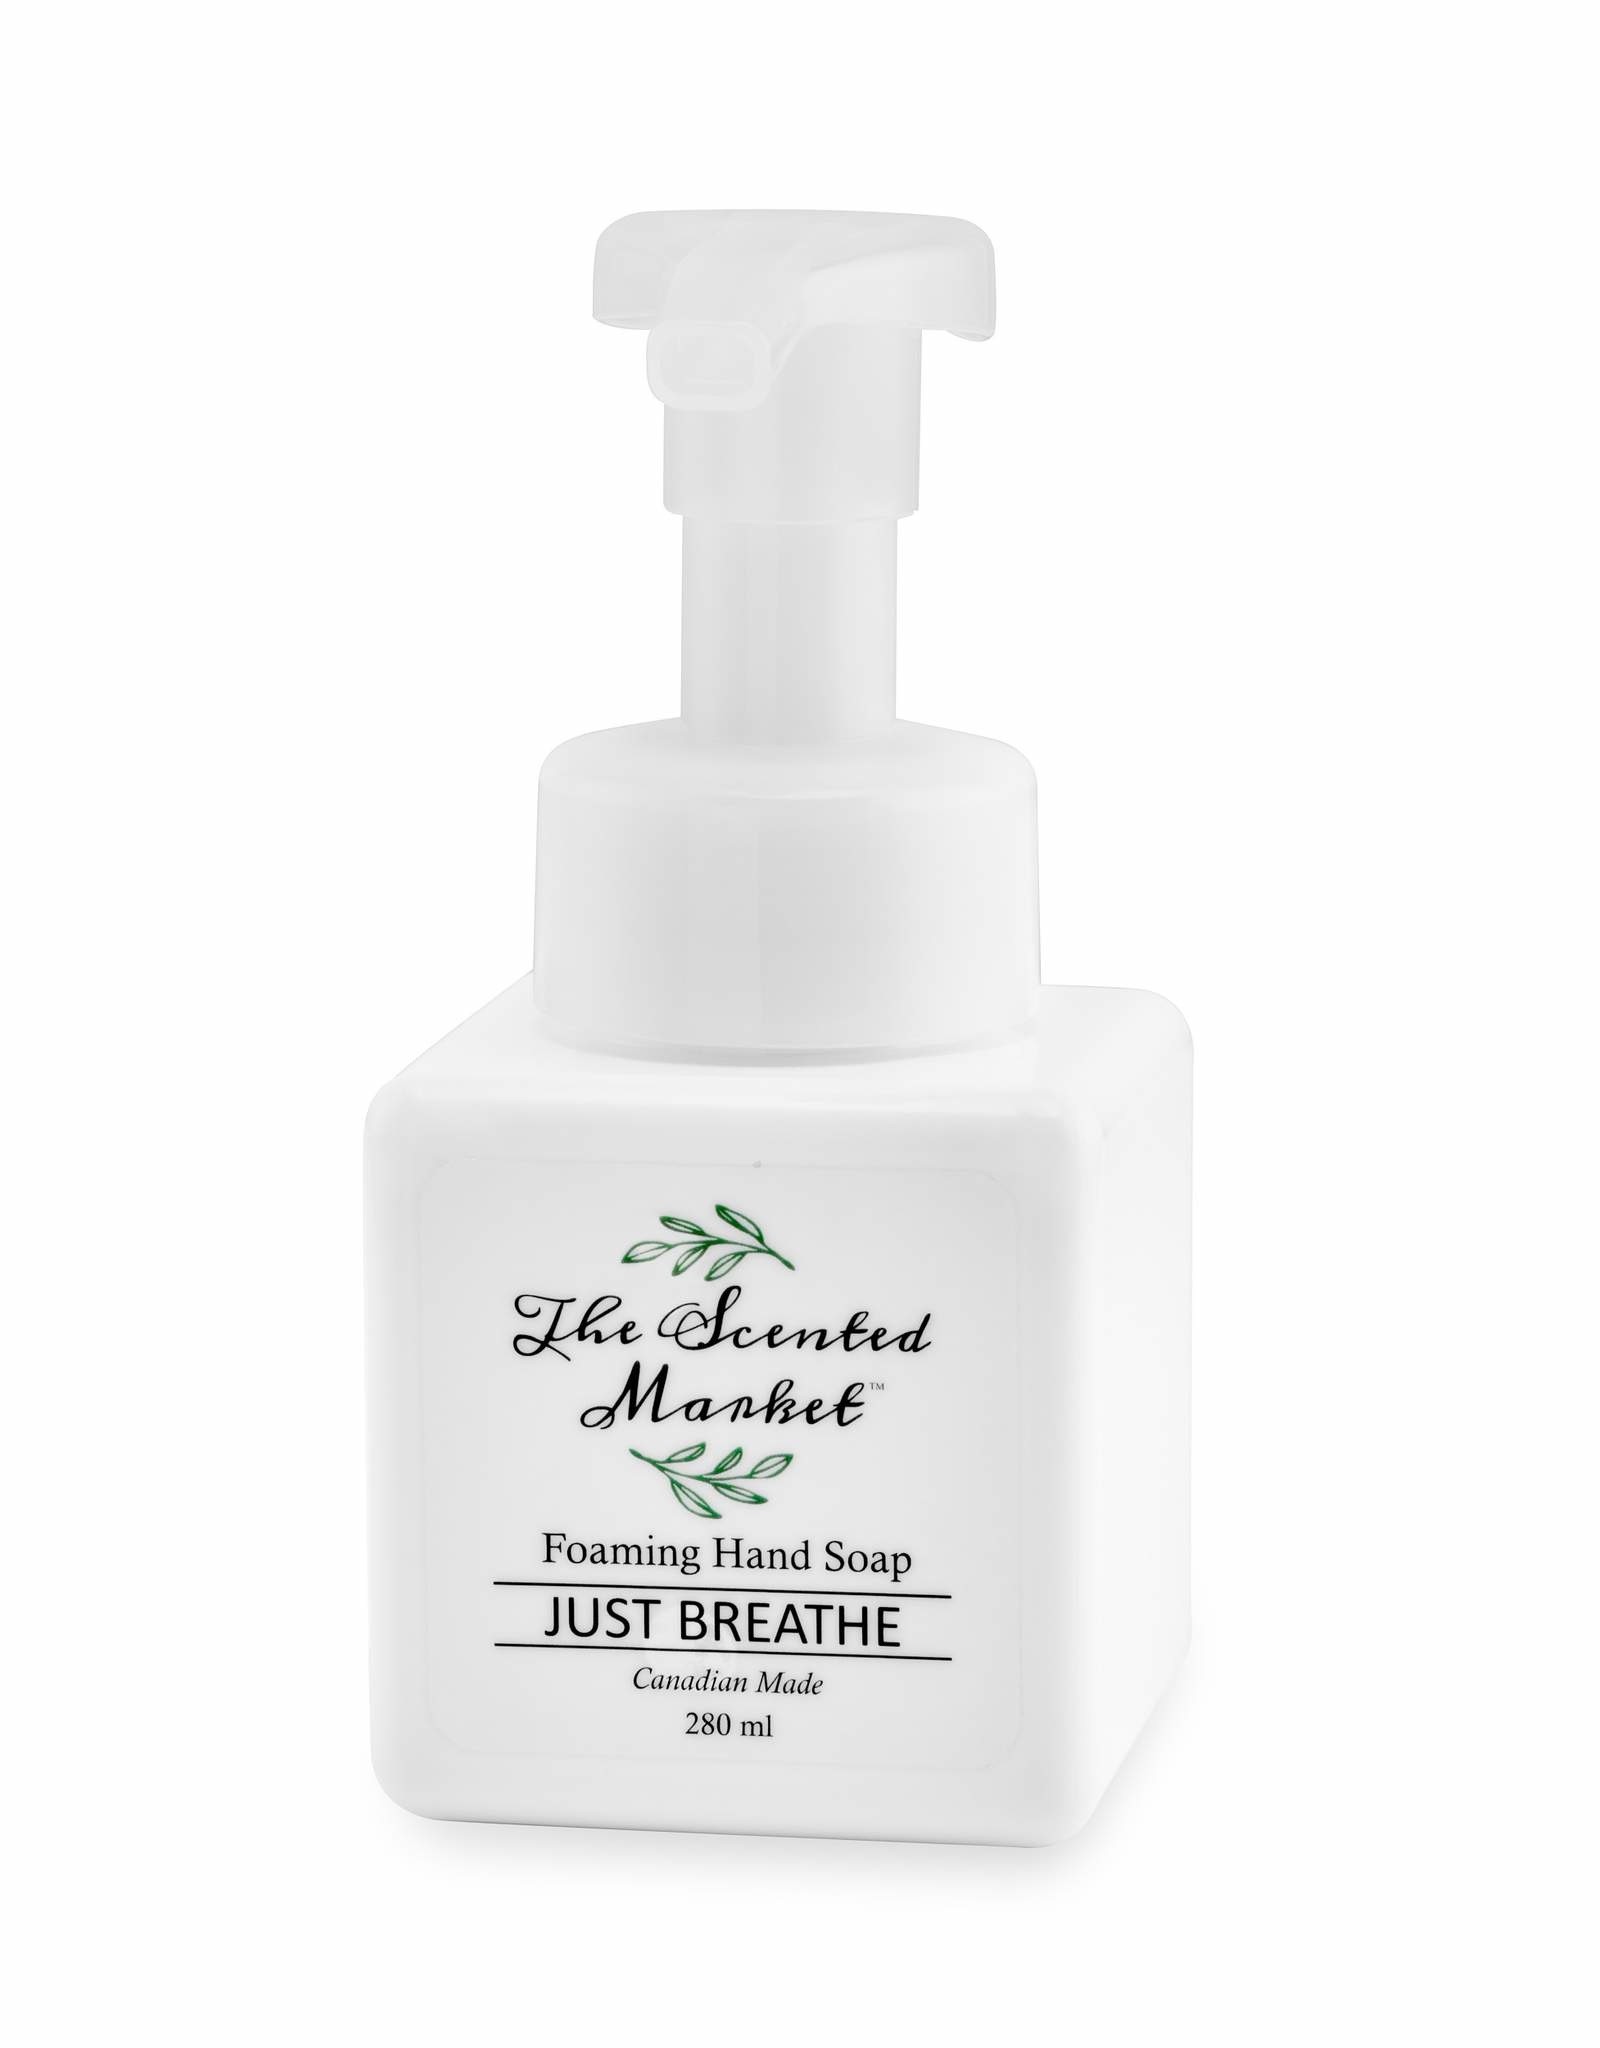 The Scented Market Foaming Hand Soap